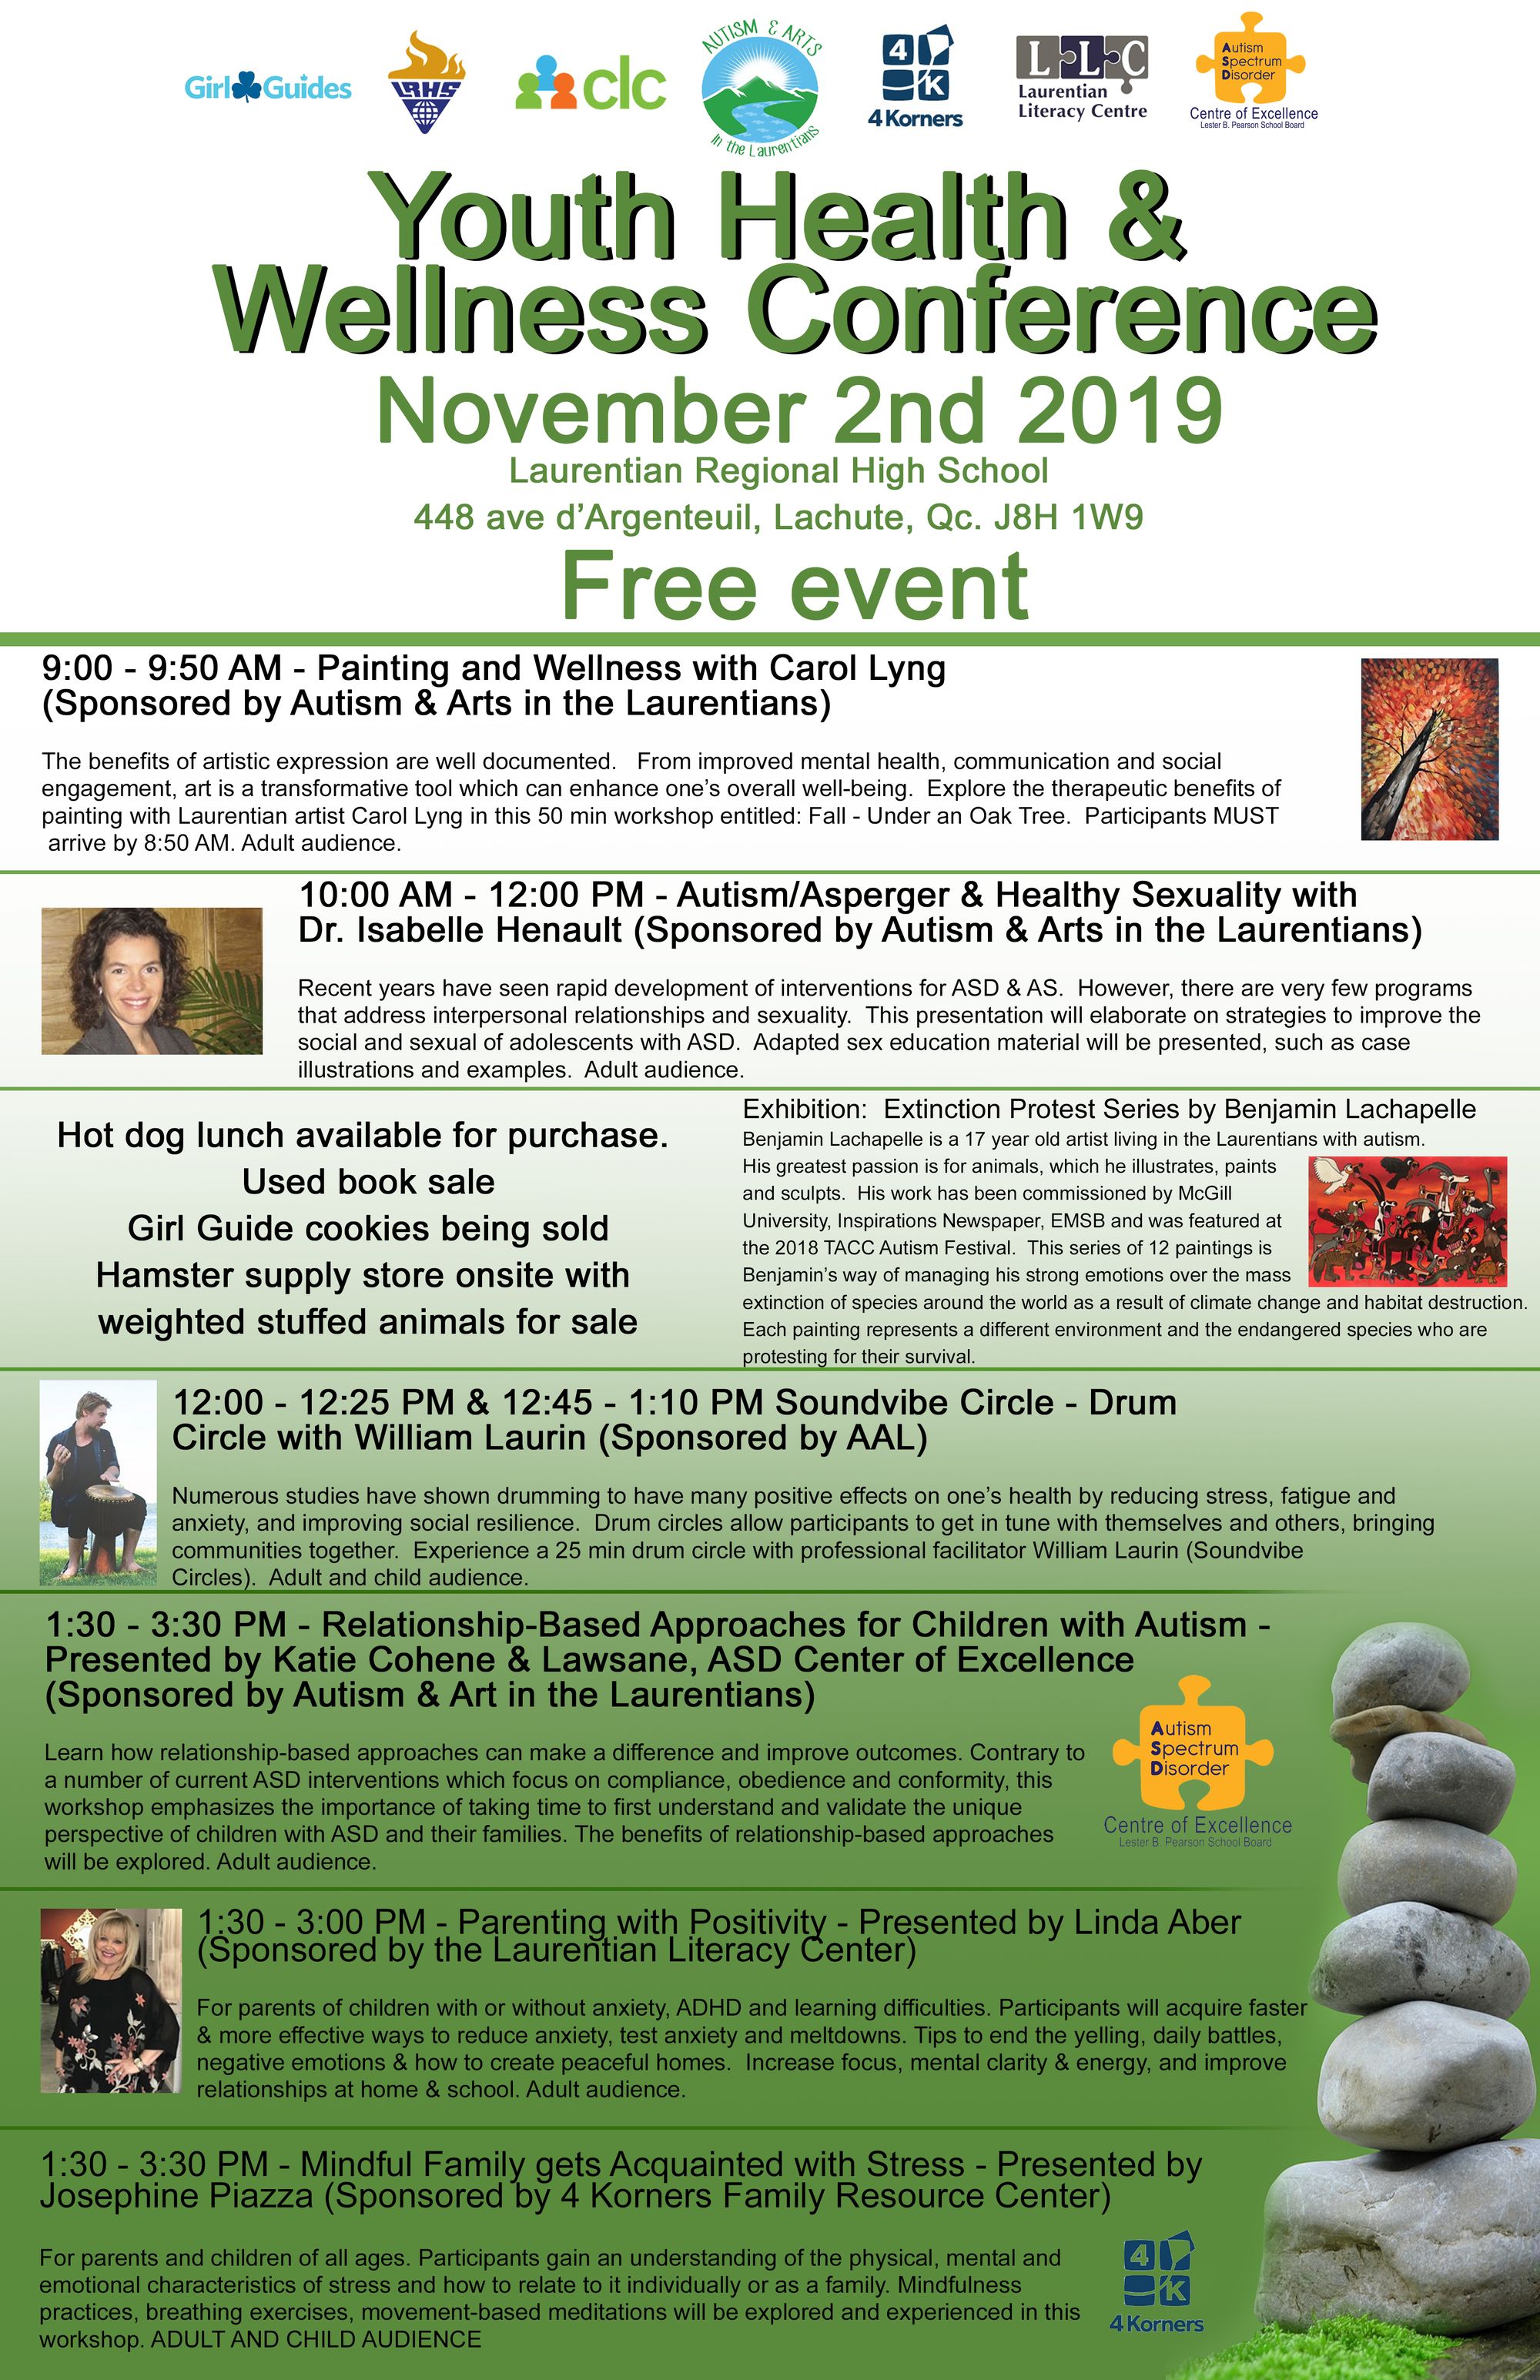 Youth health and wellness conference November 2